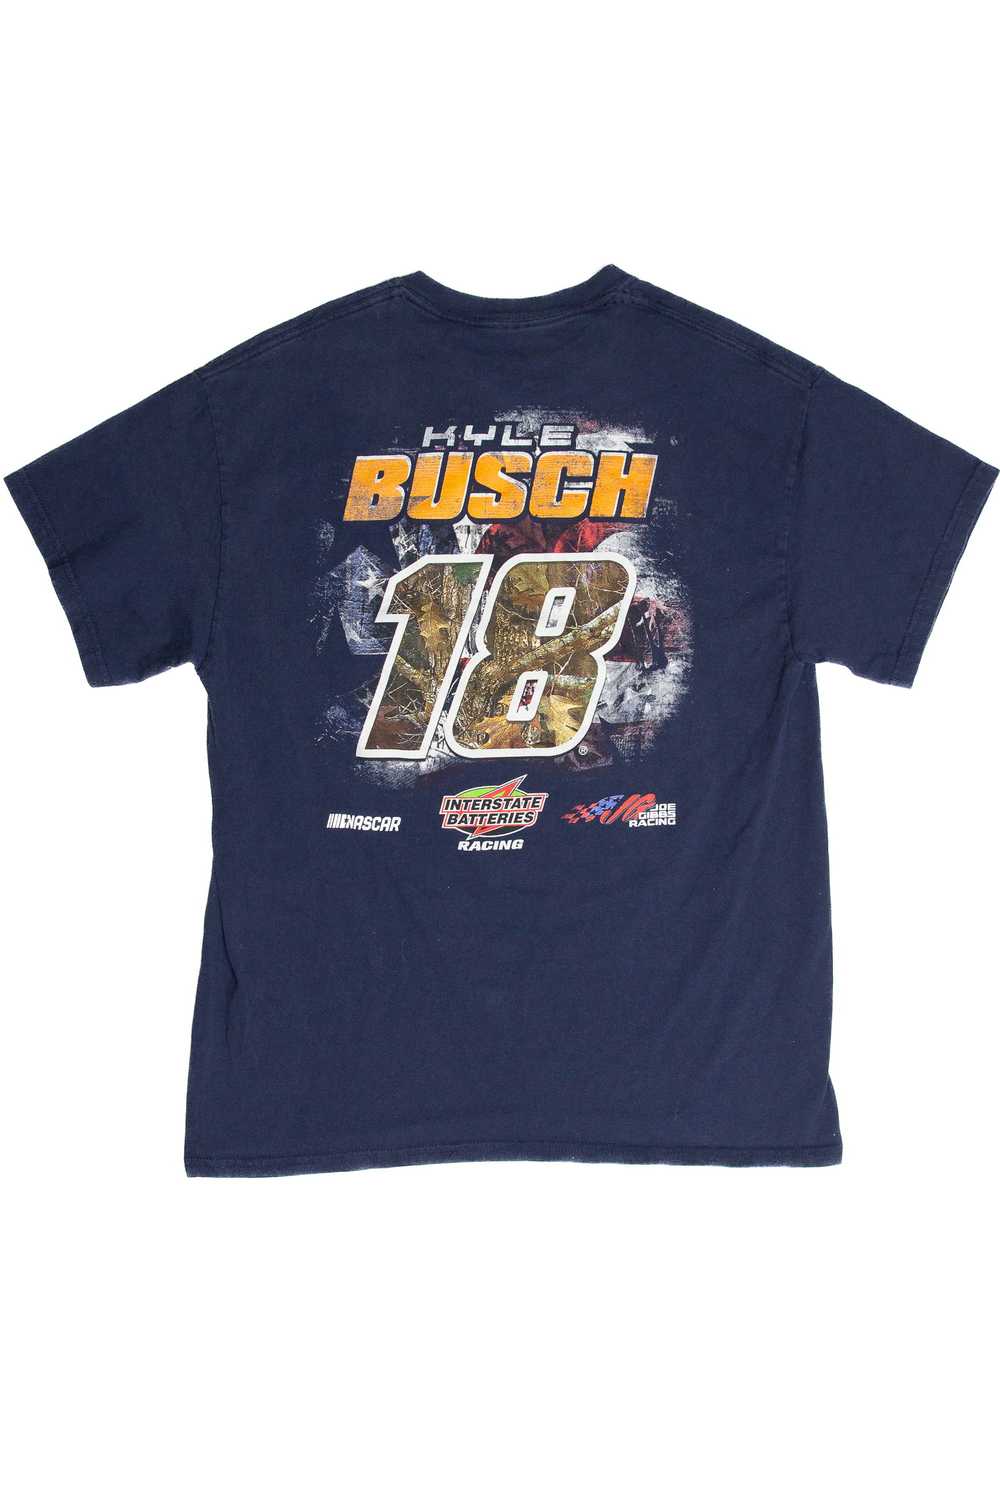 Recycled Kyle Busch Nascar T-Shirt - image 2